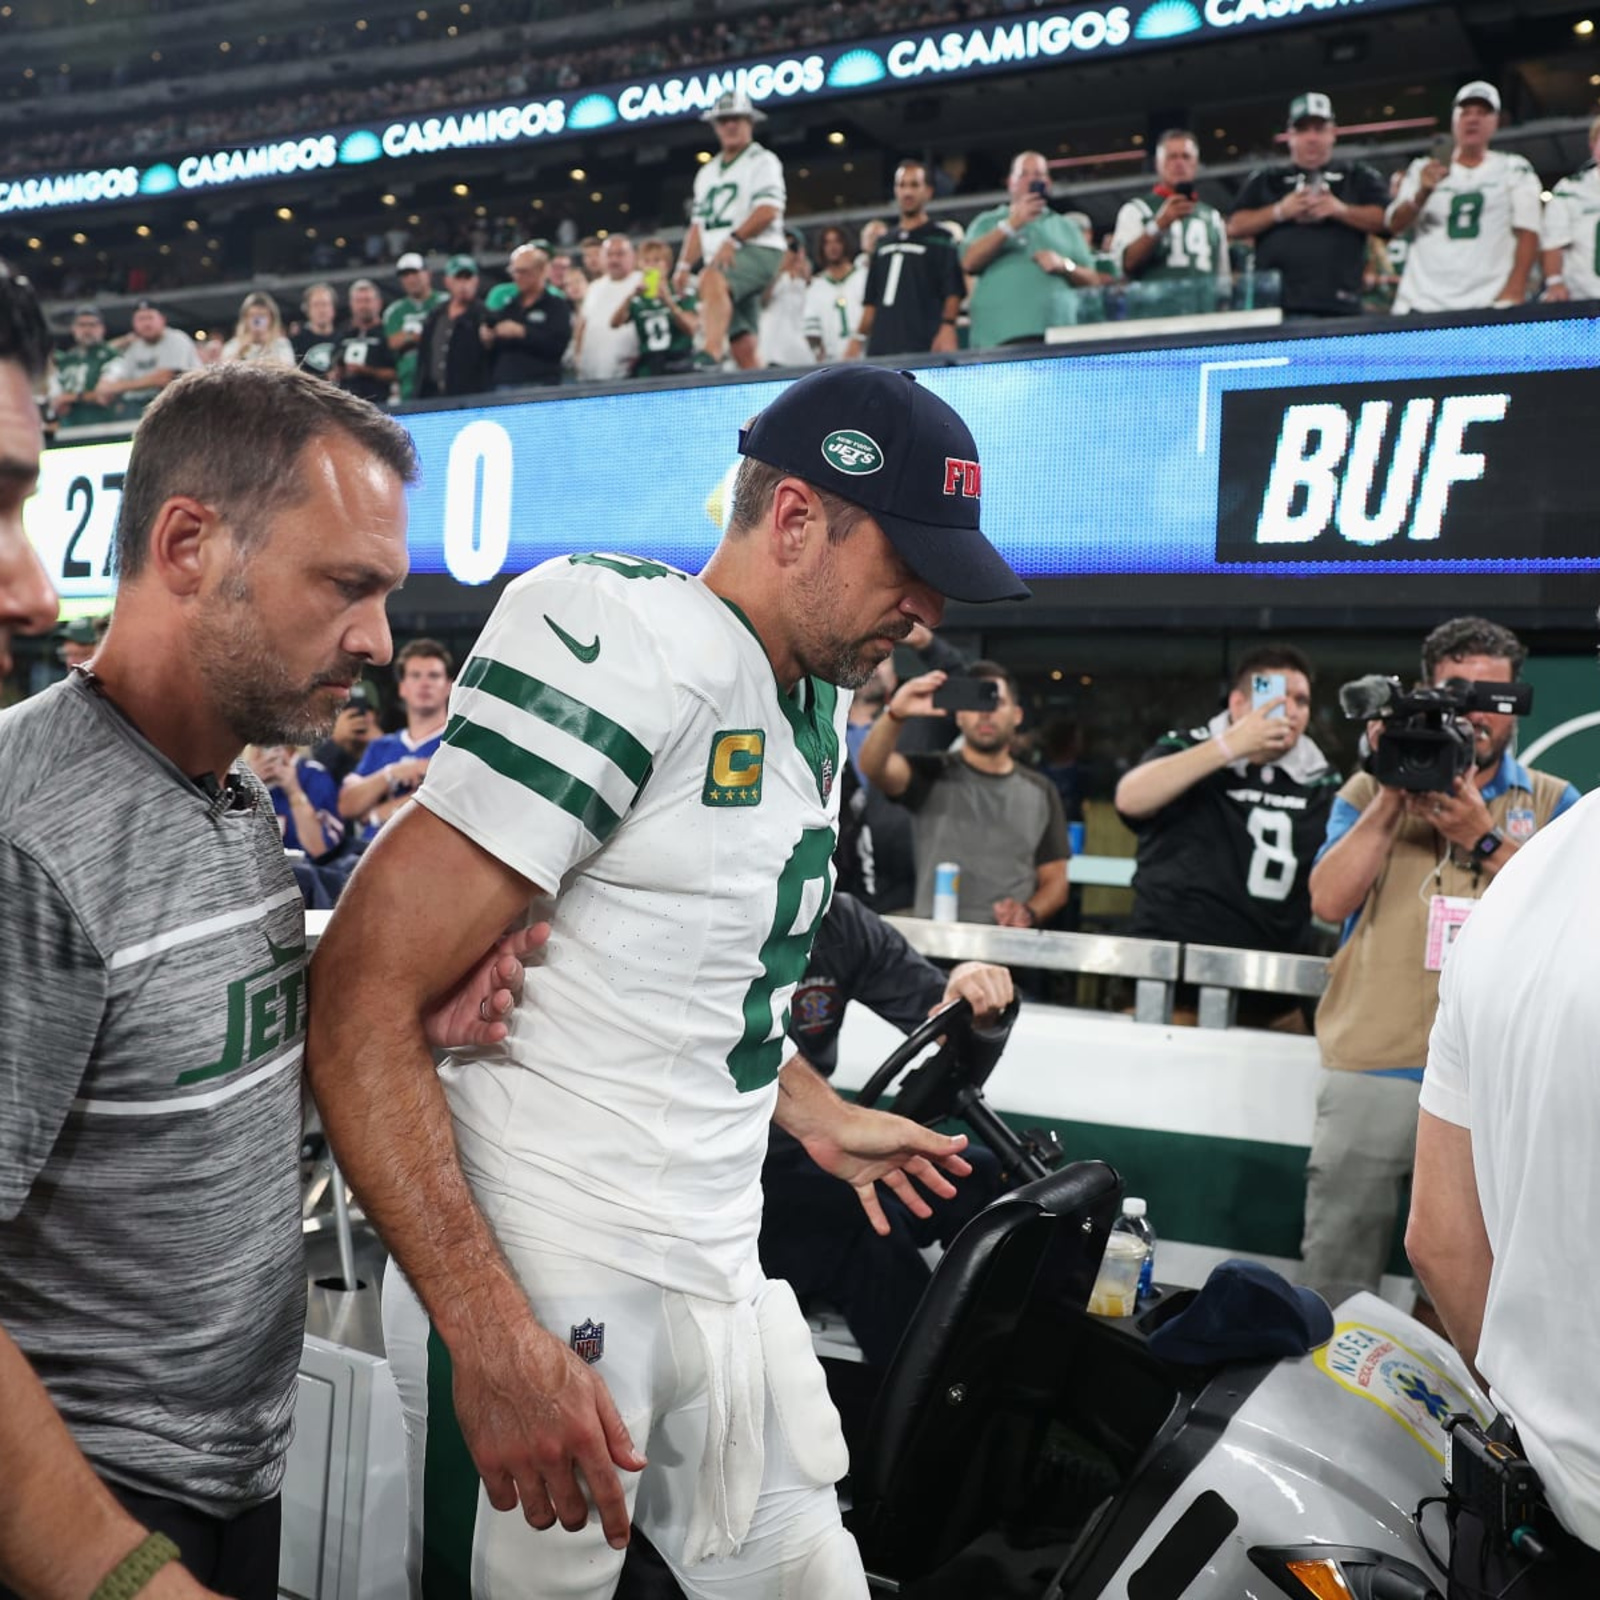 NY Jets players and fans react to new throwback jerseys